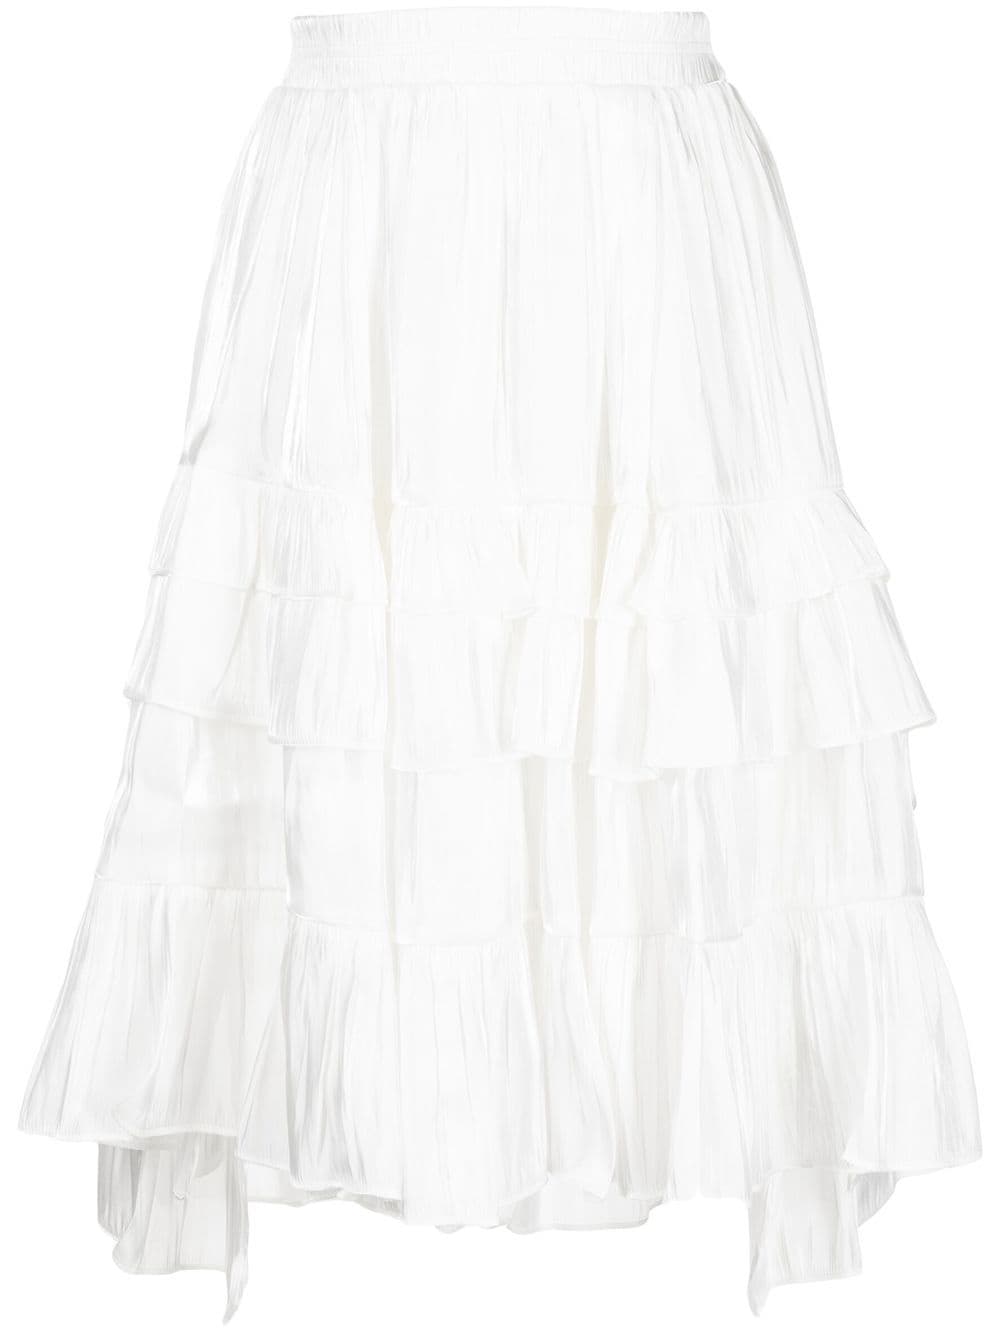 Tout a Coup Tiered Ruffled Skirt - Farfetch